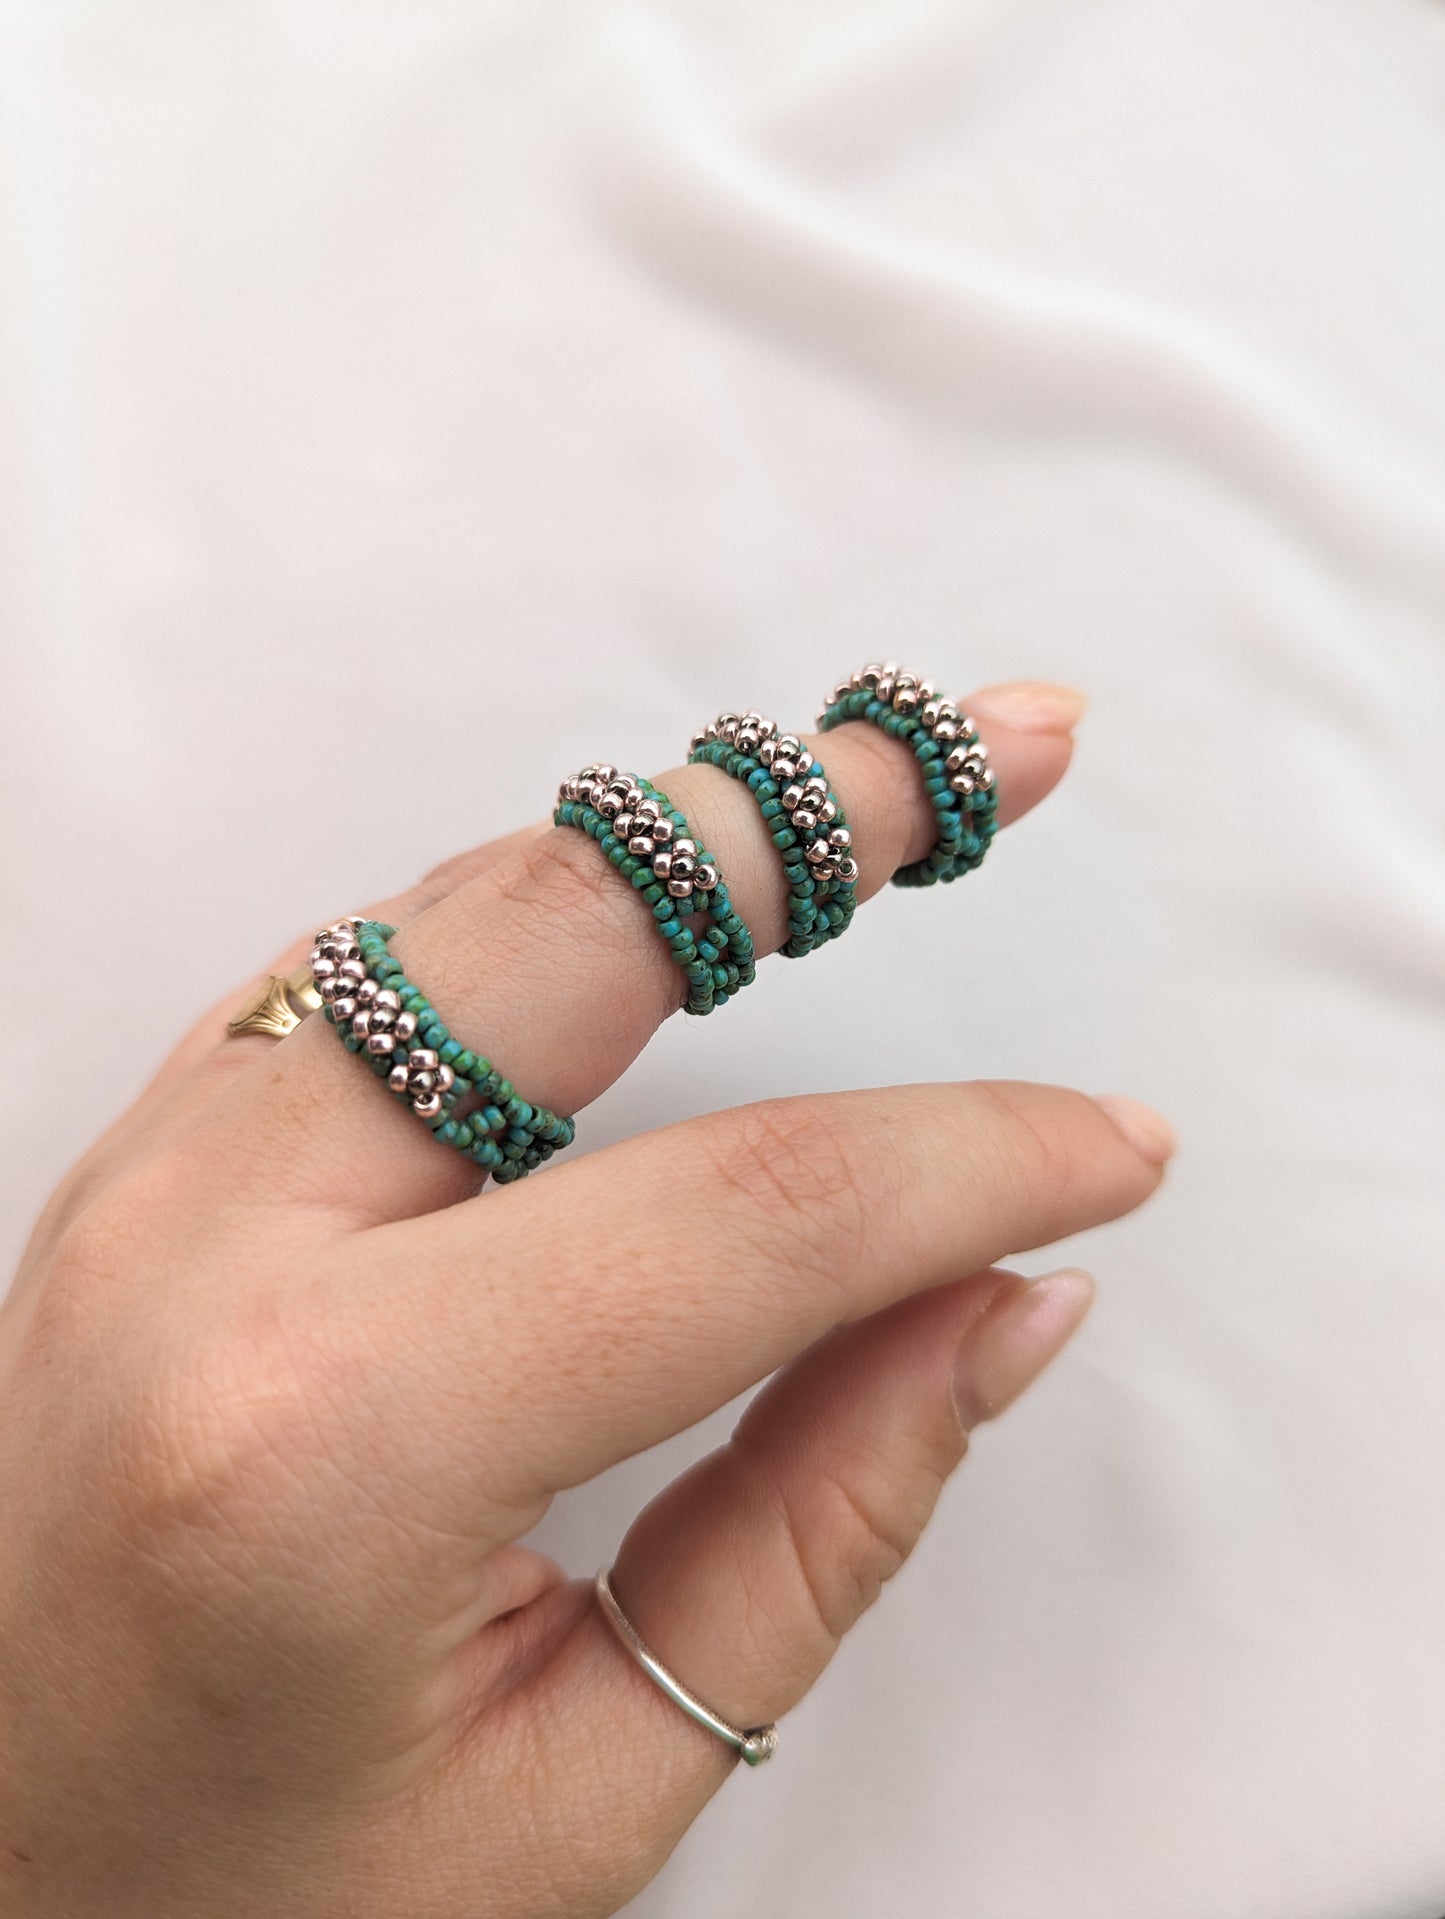 Chunky Ring - 4 Petal Flower - Turquoise Picasso & Metallic Blush - Choose Your Size